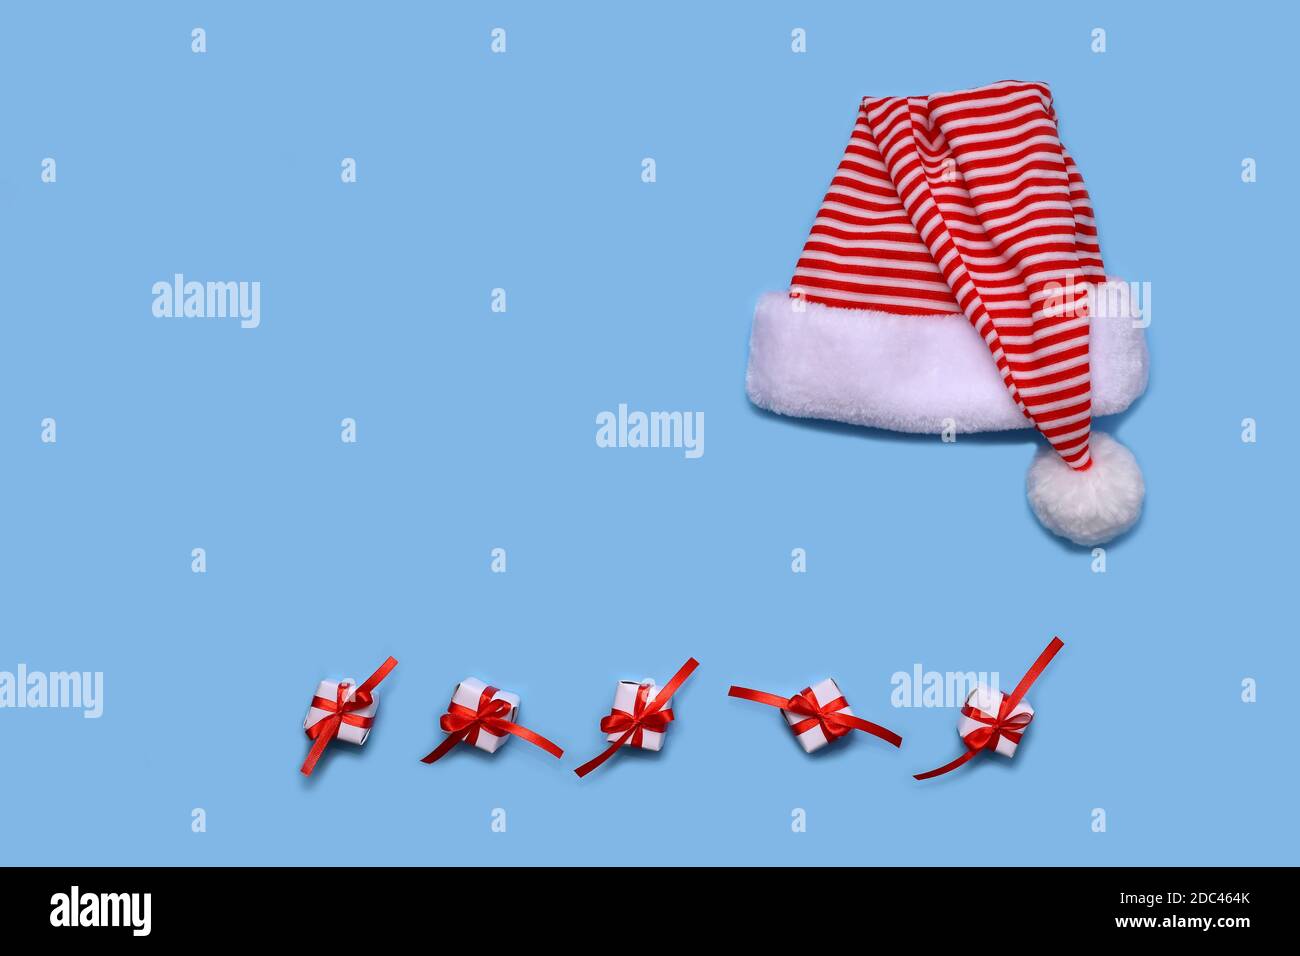 Santa's striped hat, laid out on a blue background. Below are white papered gifts and bandaged red ribbon with a bow. Stock Photo